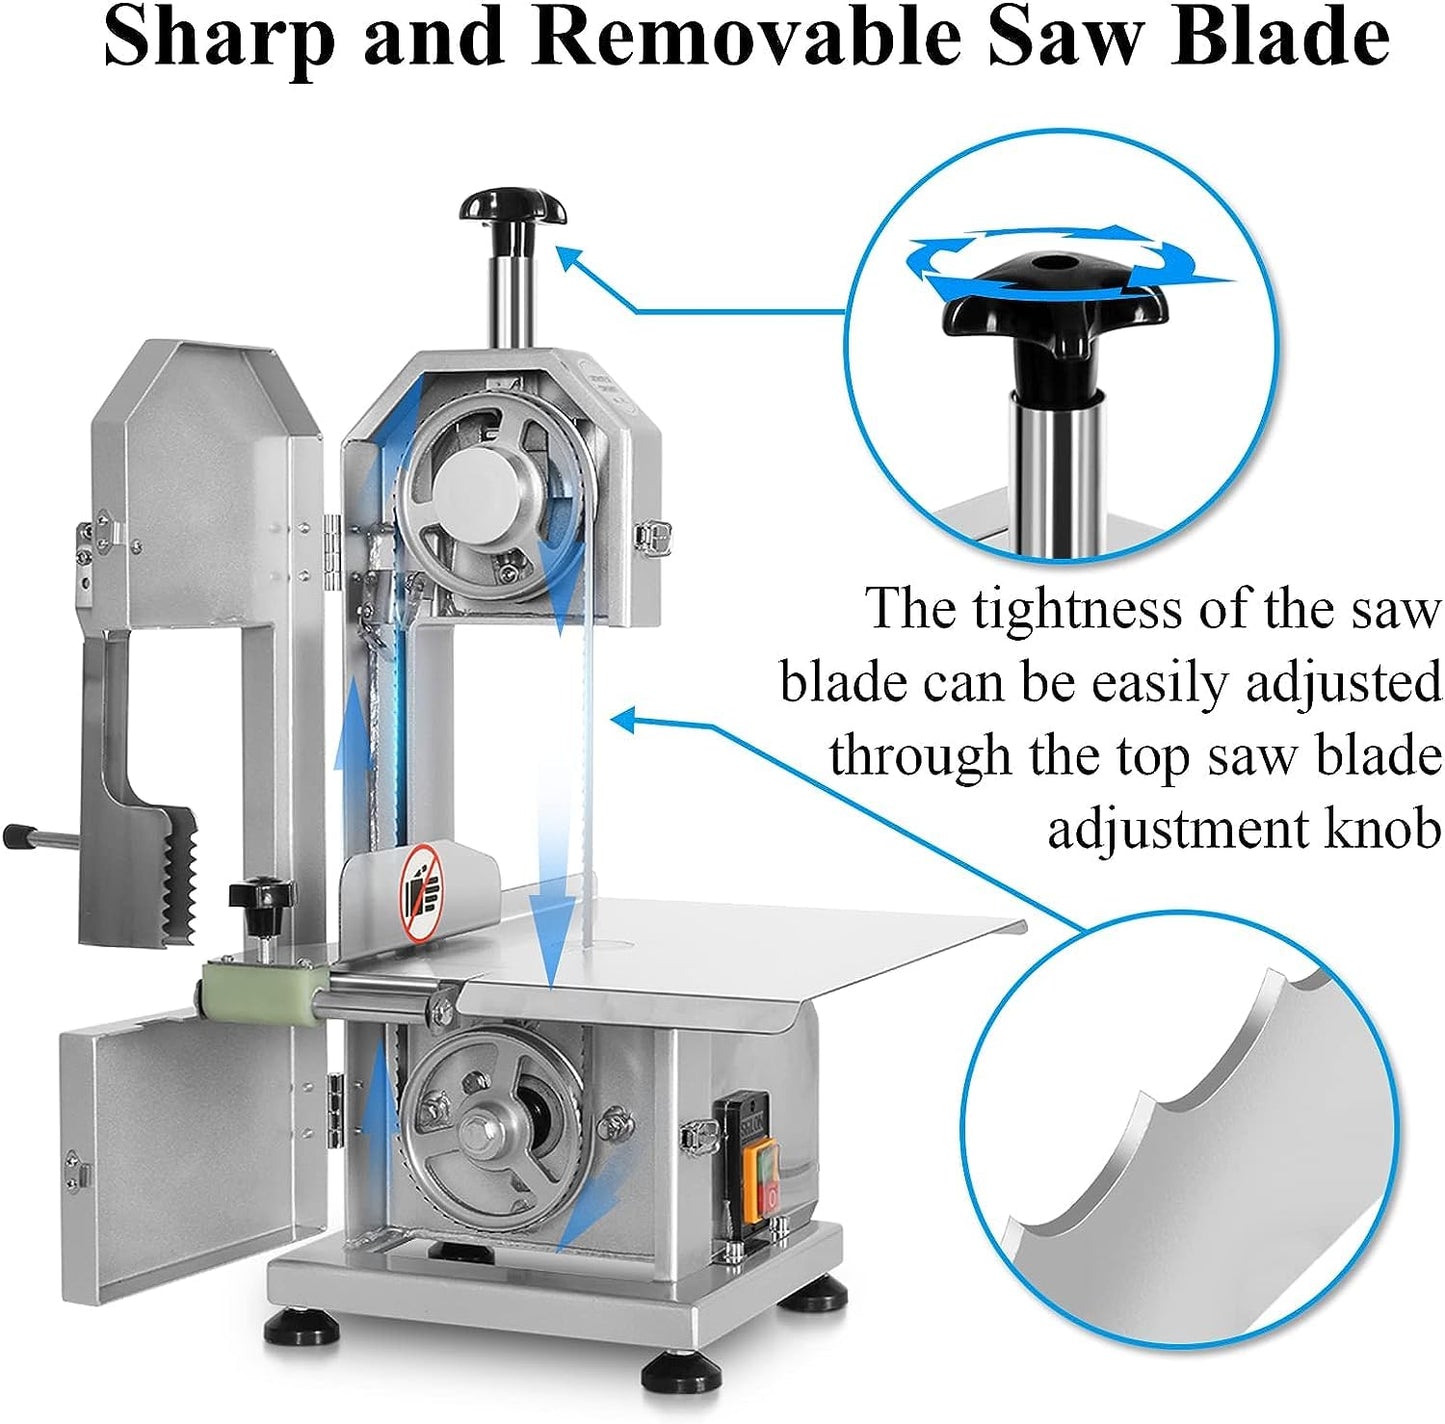 750W Electric Bone Saw Machine, Meat Bandsaw for Butchering, Thickness Range 0.8-4.3 Inch, 20x13 Inch Table Sawing for Cutting Chops, Frozen Meat,